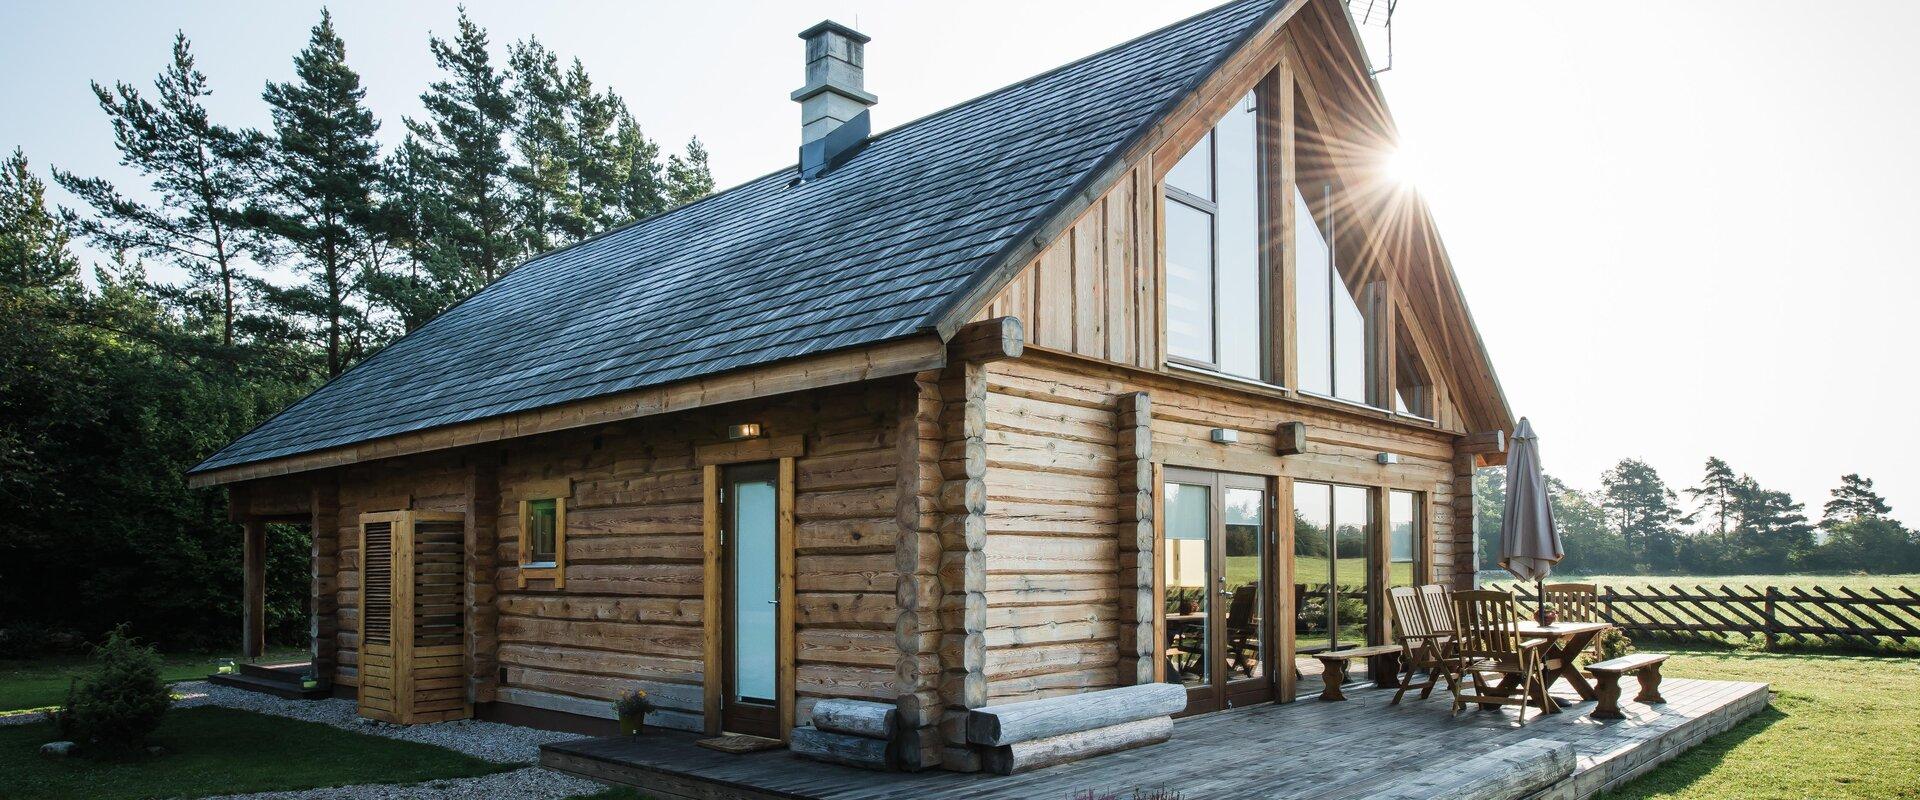 Situated in the privacy of a forest on the Kuusnõmme peninsula, this cosy log home is the ideal place for a break in the middle of nature! The holiday